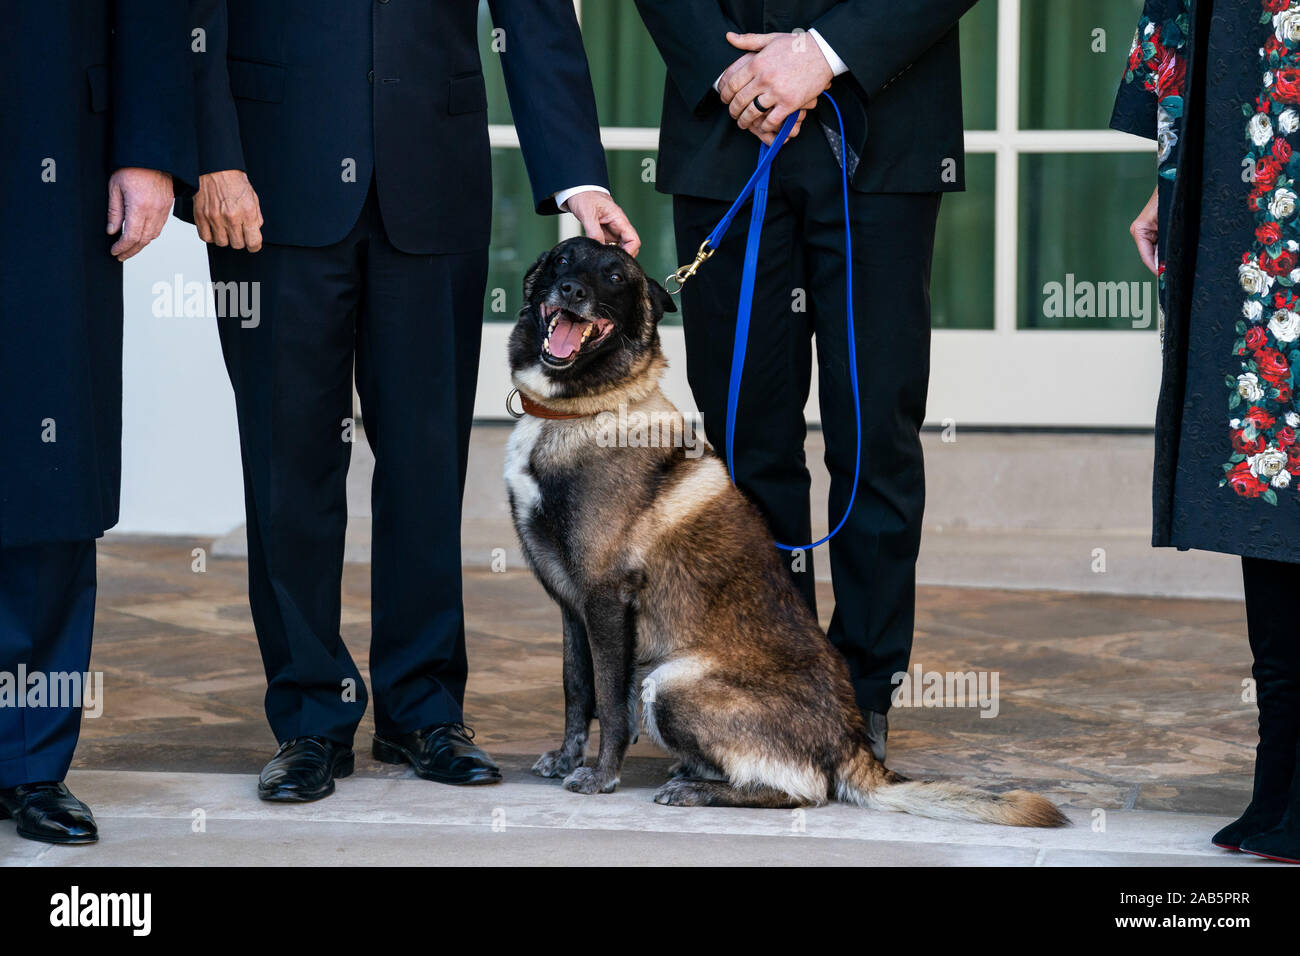 Washington, United States. 25th Nov, 2019. Vice President Mike Pence pets Conan the military working dog as President Trump speaks about the dog, at the White House in Washington, DC on November 25, 2019. The dog Conan assisted in the Baghdadi raid and was awarded a medal by President Trump. Photo by Kevin Dietsch/UPI Credit: UPI/Alamy Live News Stock Photo